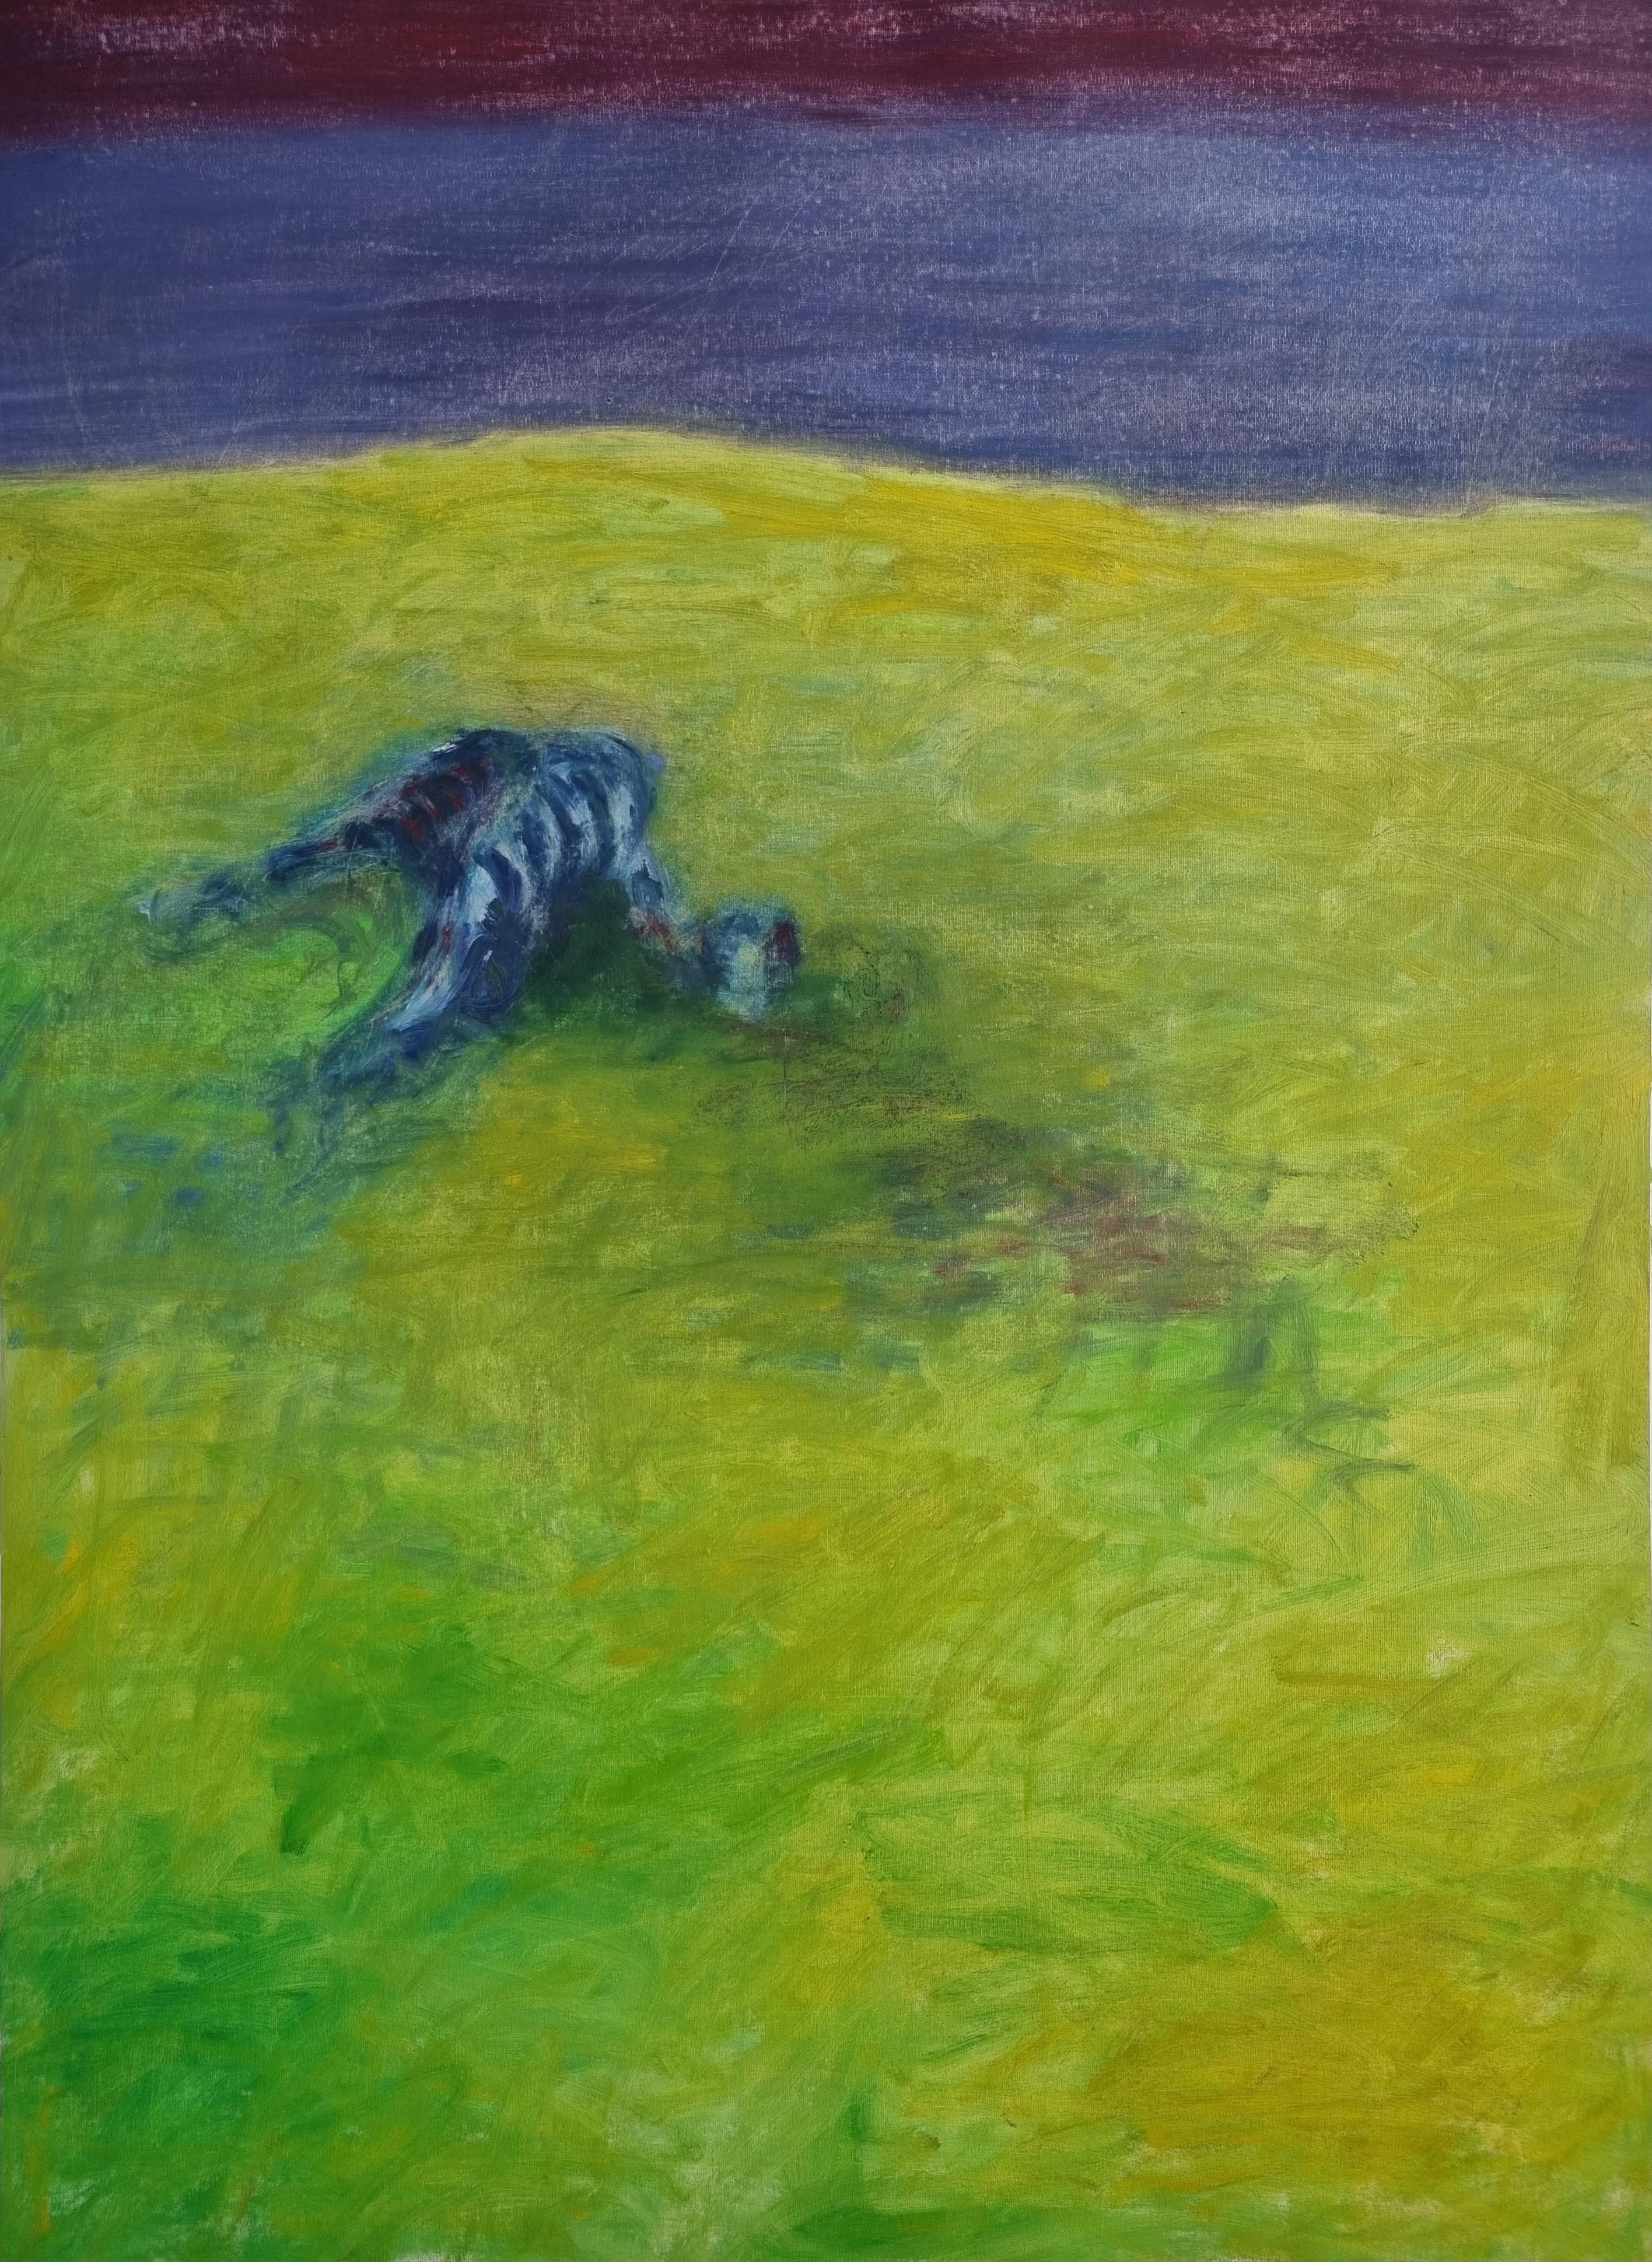 Body in the Field 1 - 21st Century, Green, Blue, Painting